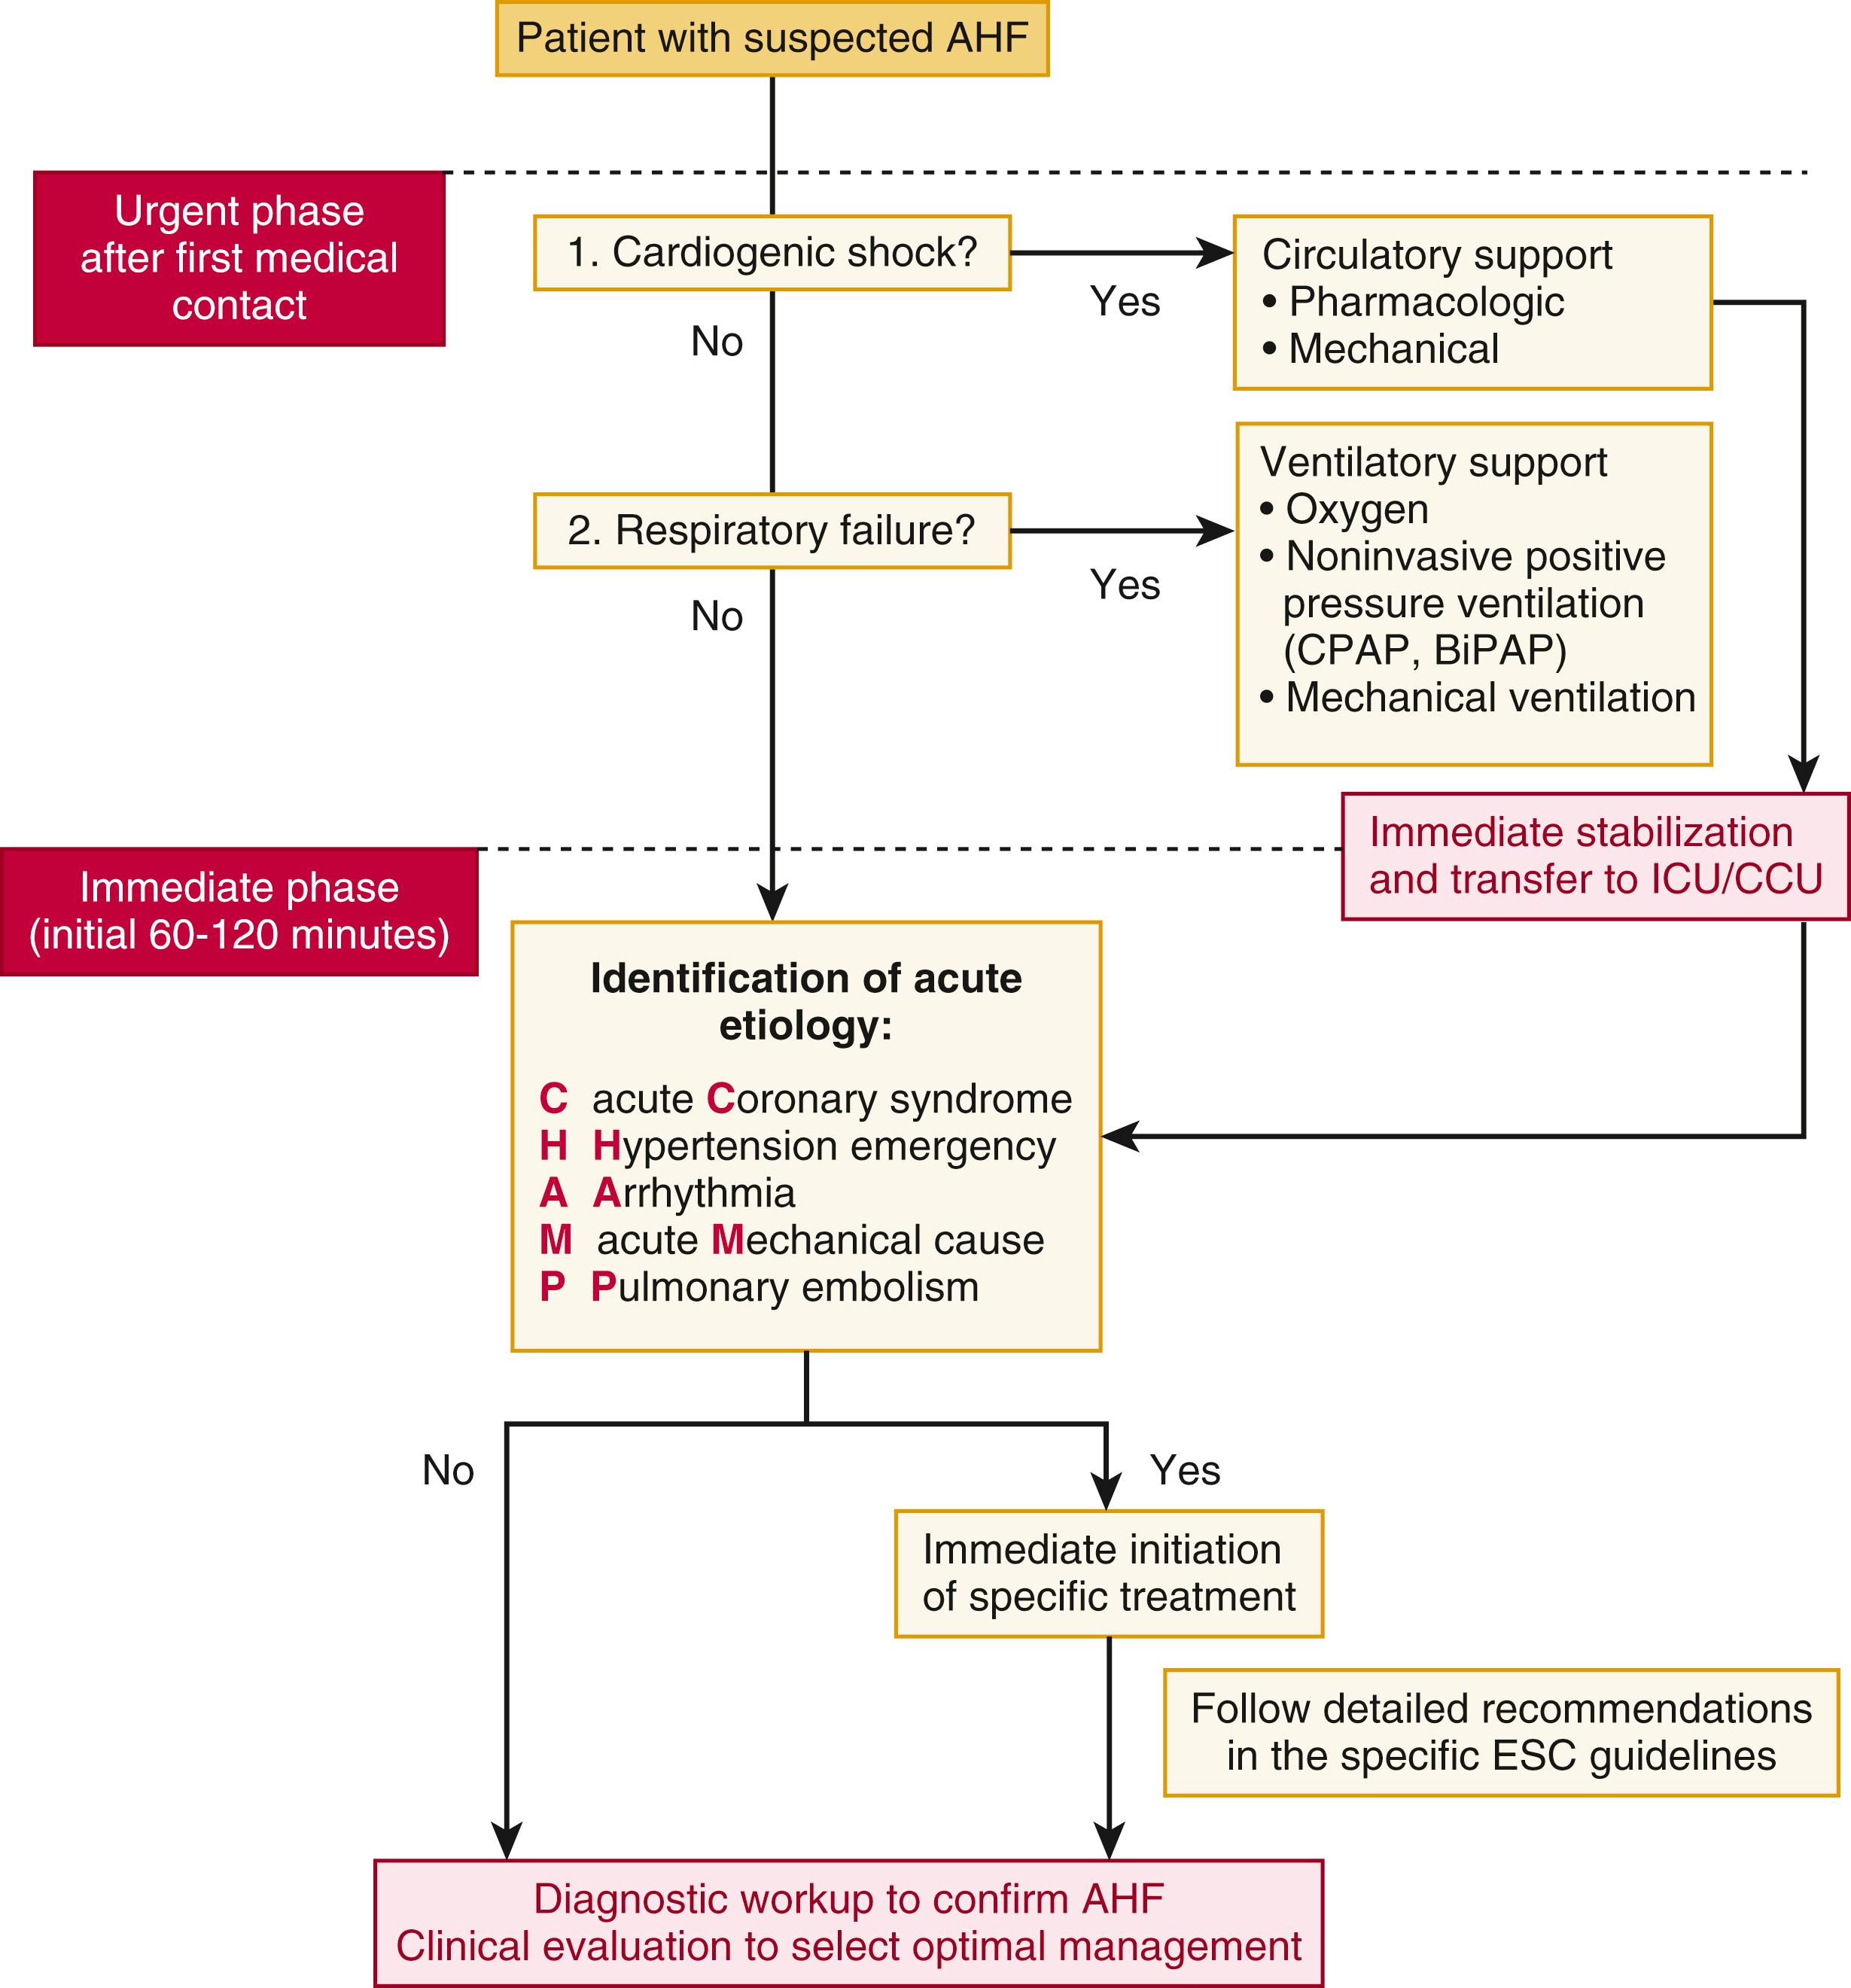 FIGURE 49.6, Algorithm for initial stabilization and management of patients with acute heart failure.